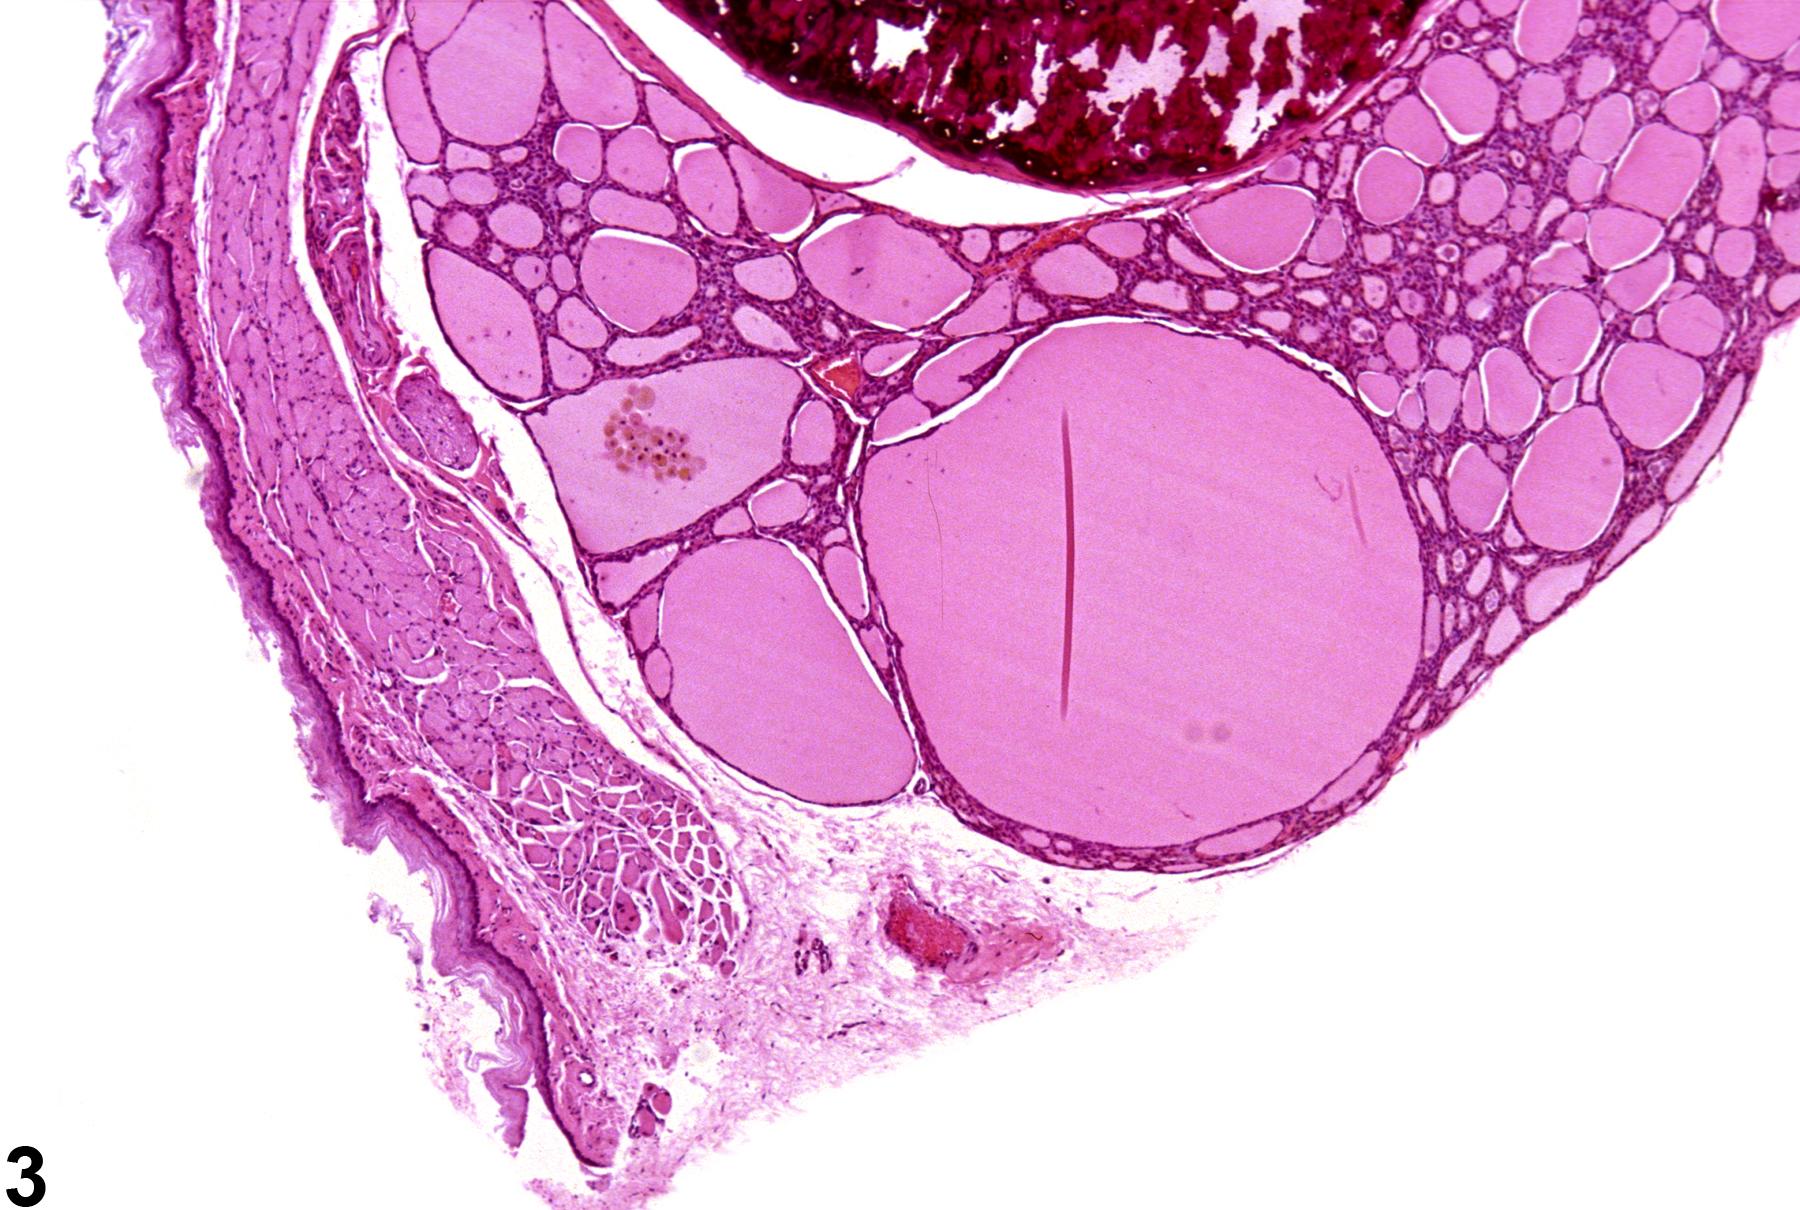 Image of follicle dilation in the thyroid gland from a male F344/N rat in a chronic study